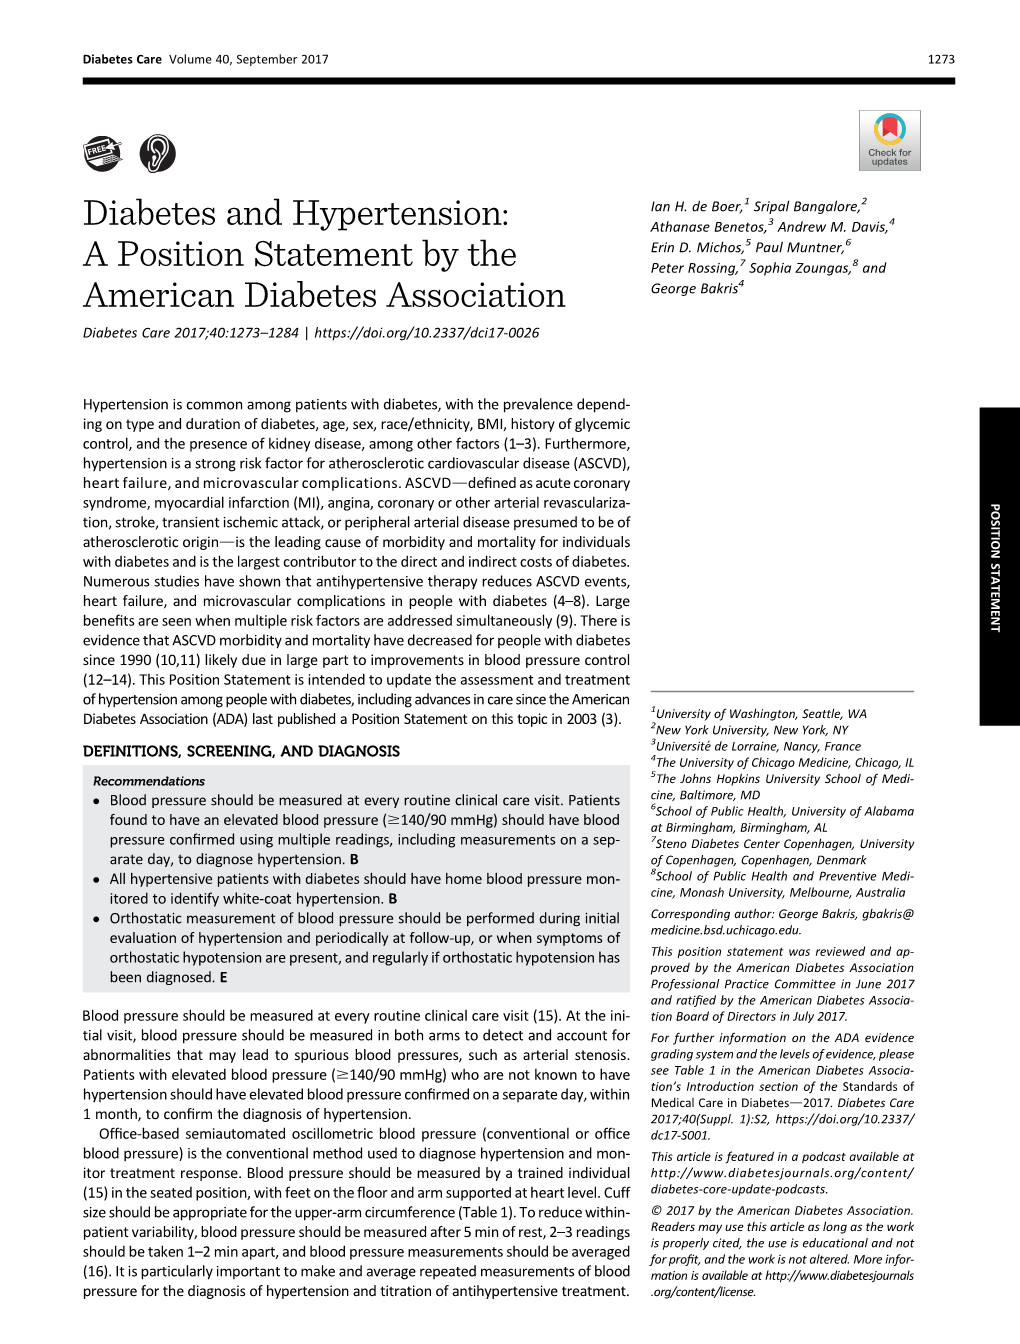 Diabetes and Hypertension: a Position Statement by the American